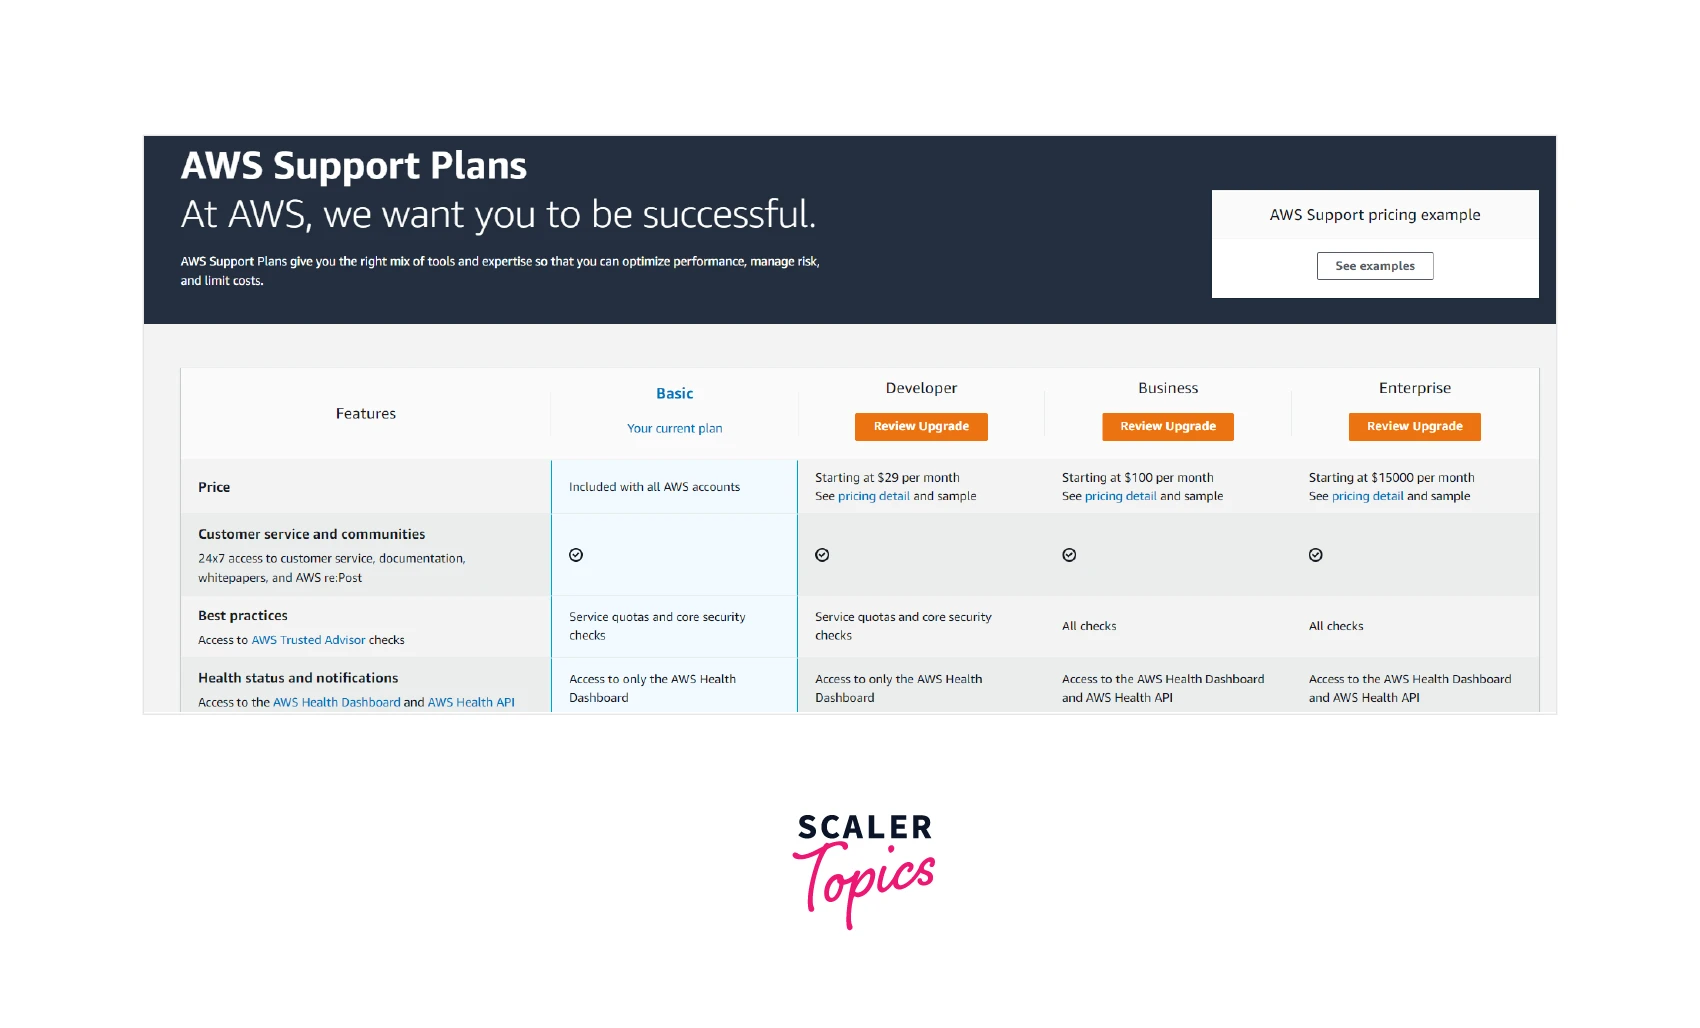 How to Sign Up for an AWS Support Plan3